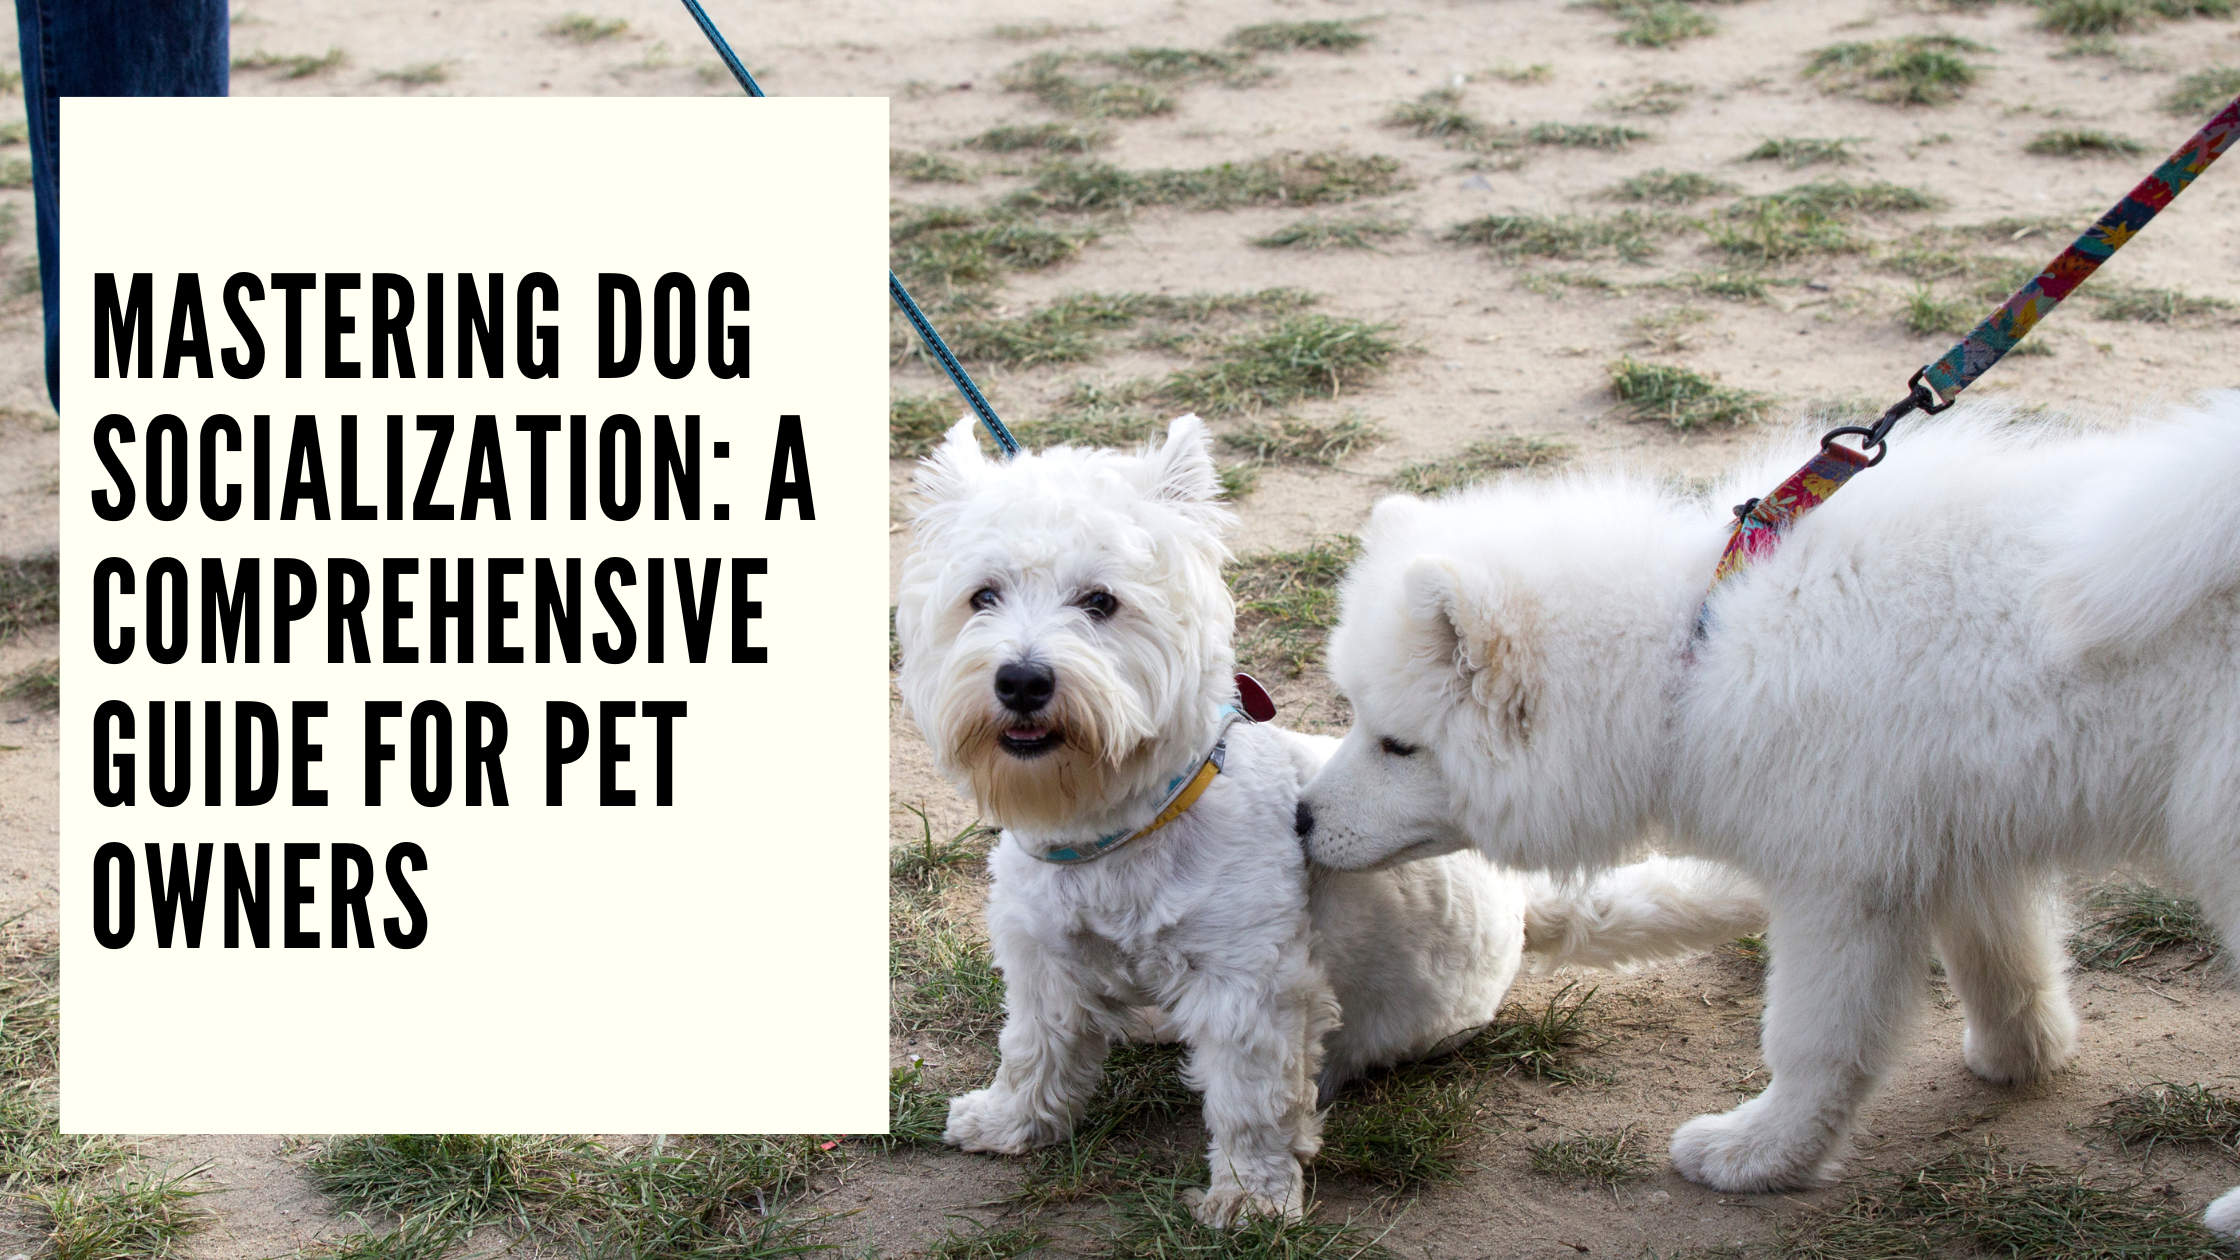 Mastering Dog Socialization A Comprehensive Guide for Pet Owners